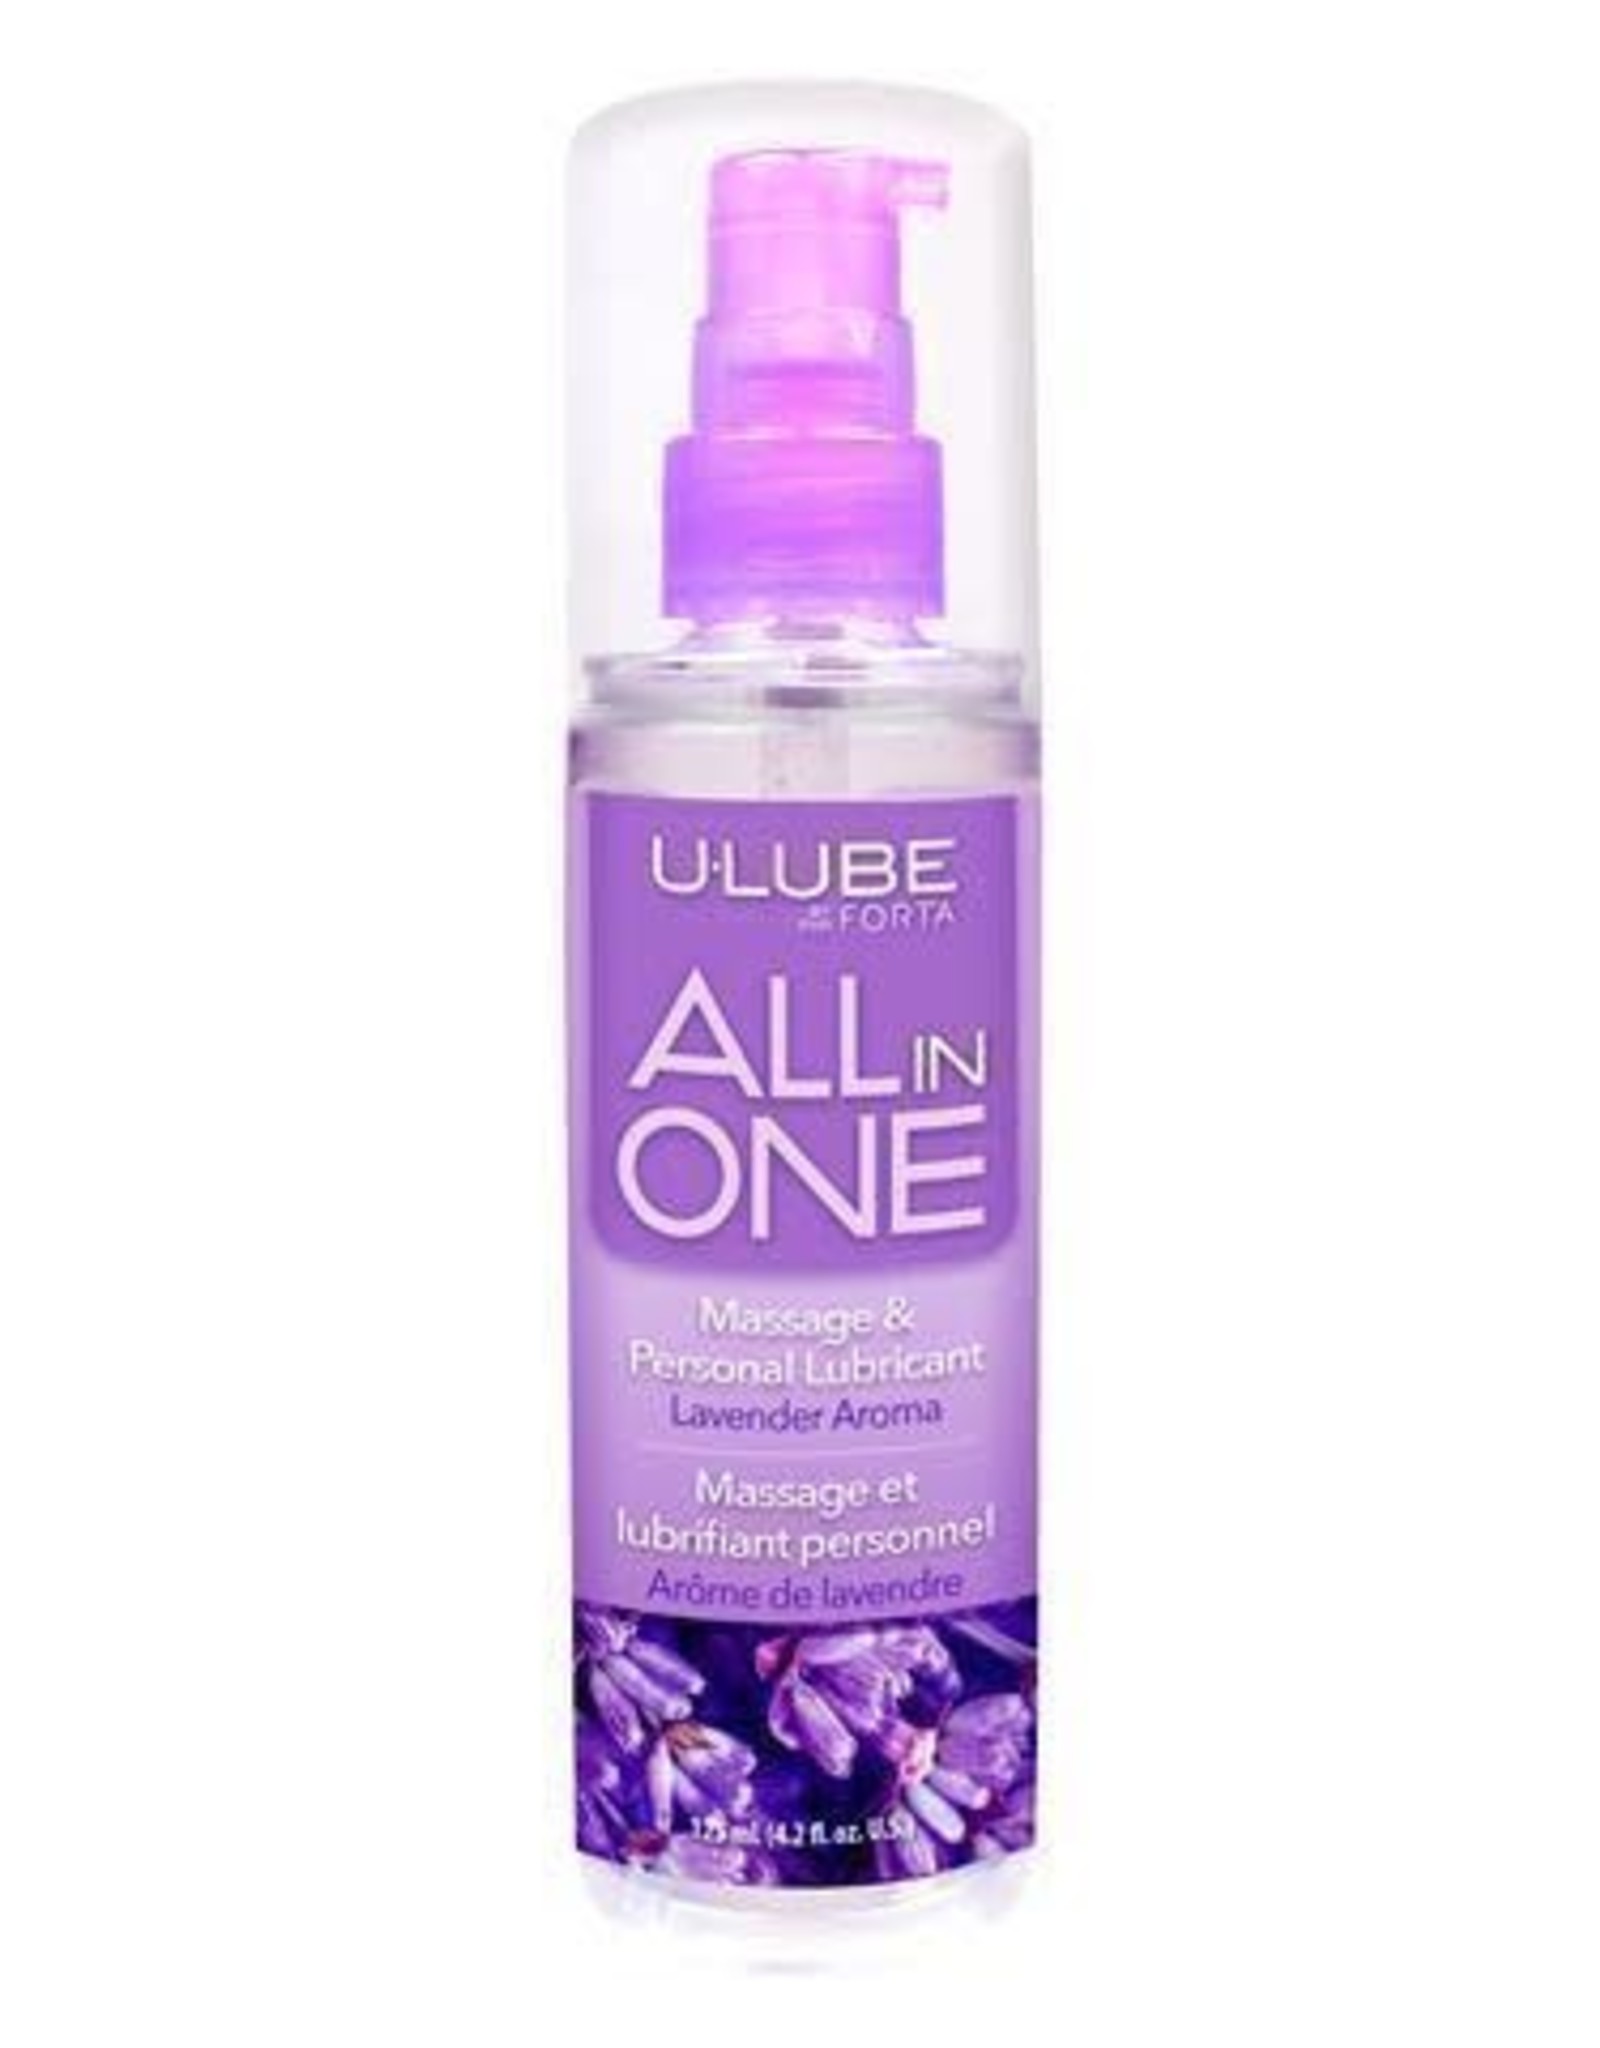 All in One Massage/Lubricant - Lavender - 4 oz